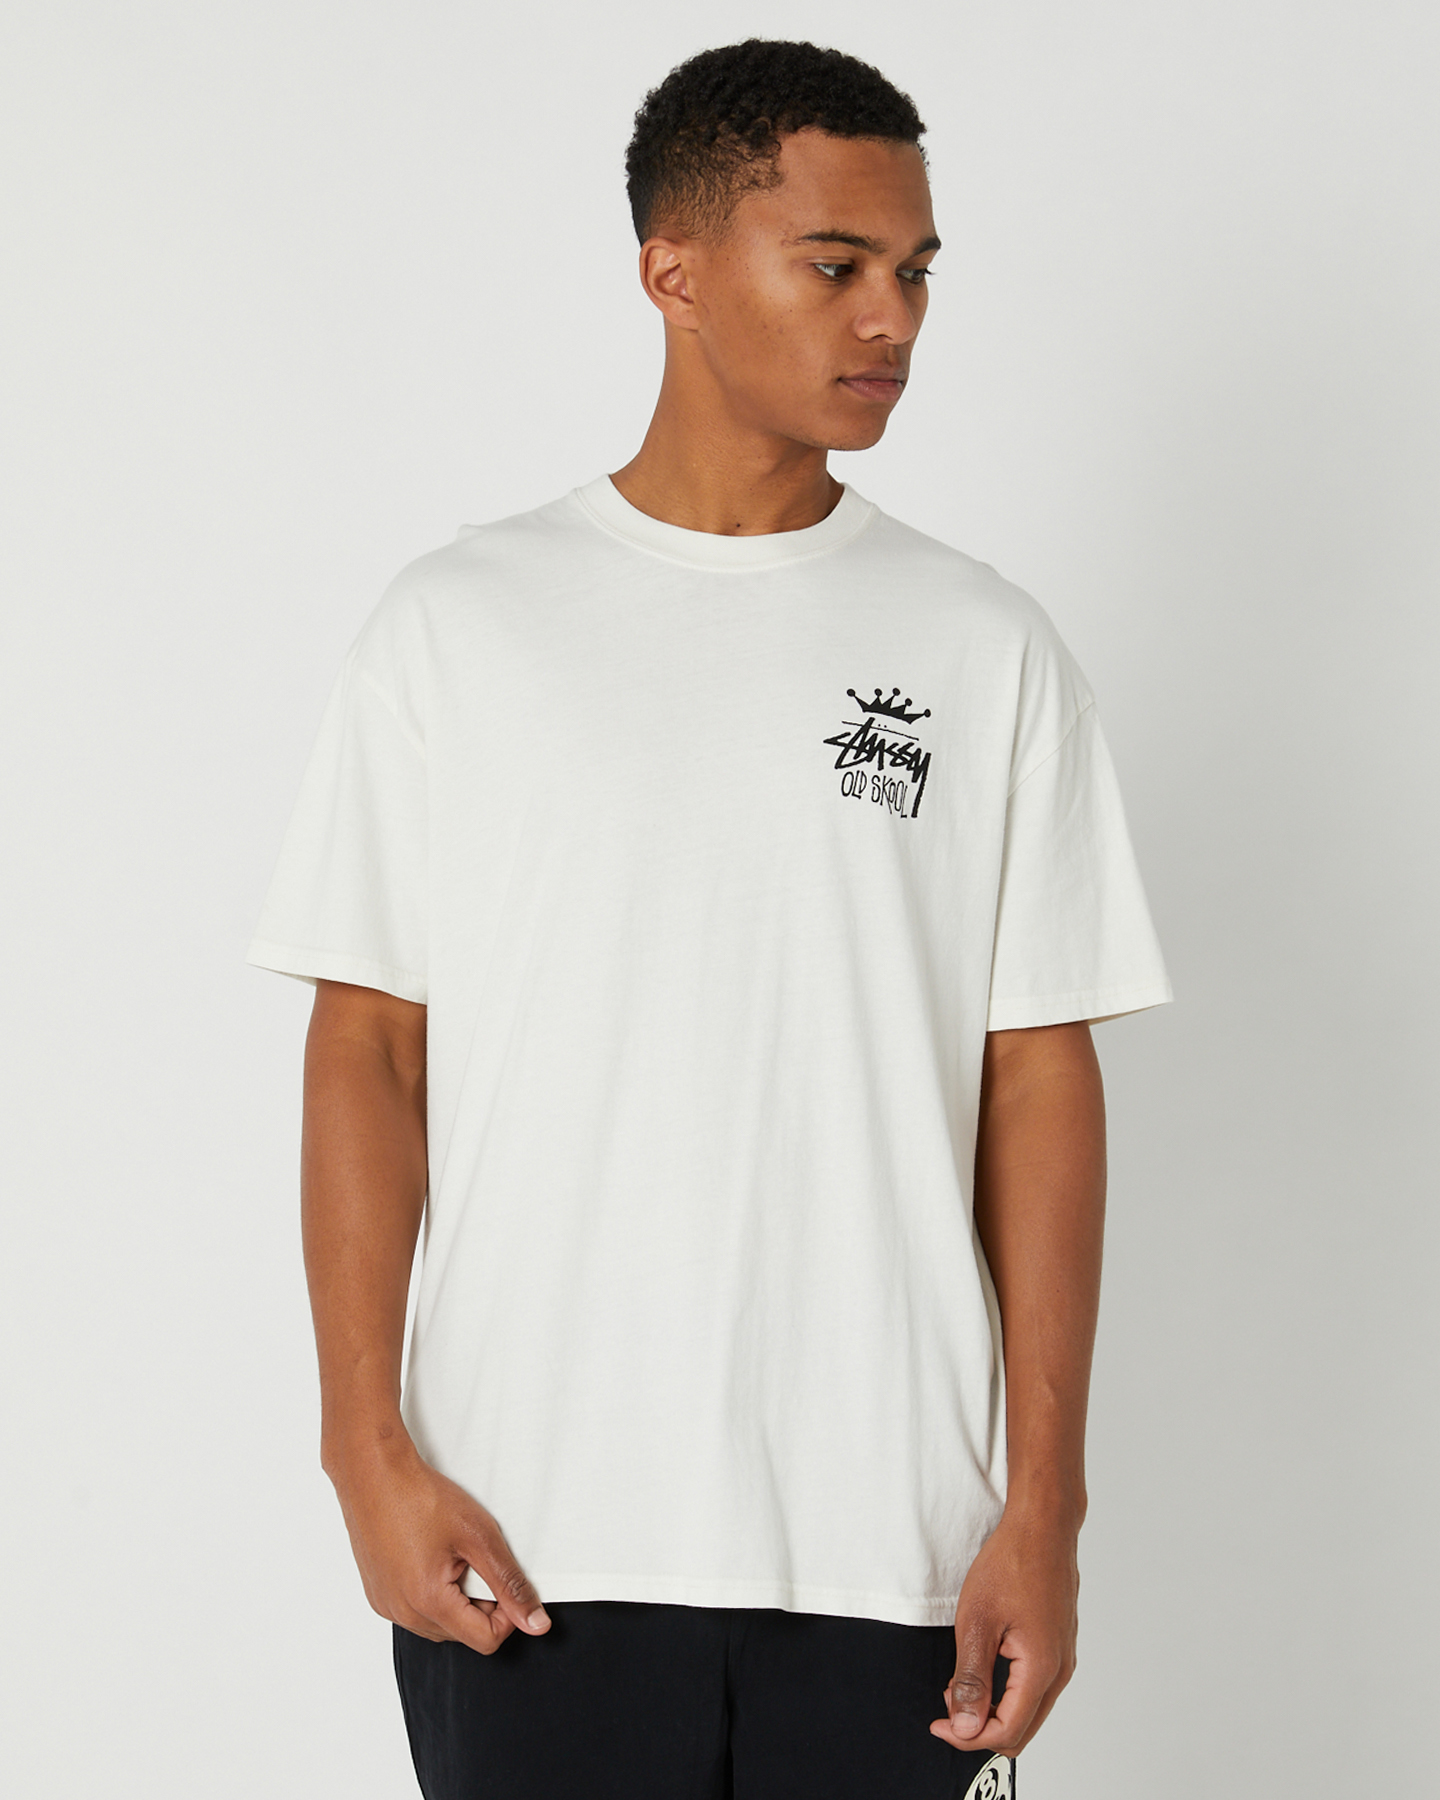 Stussy Old Skool 50-50 Ss Tee - Pigment Washed White | SurfStitch